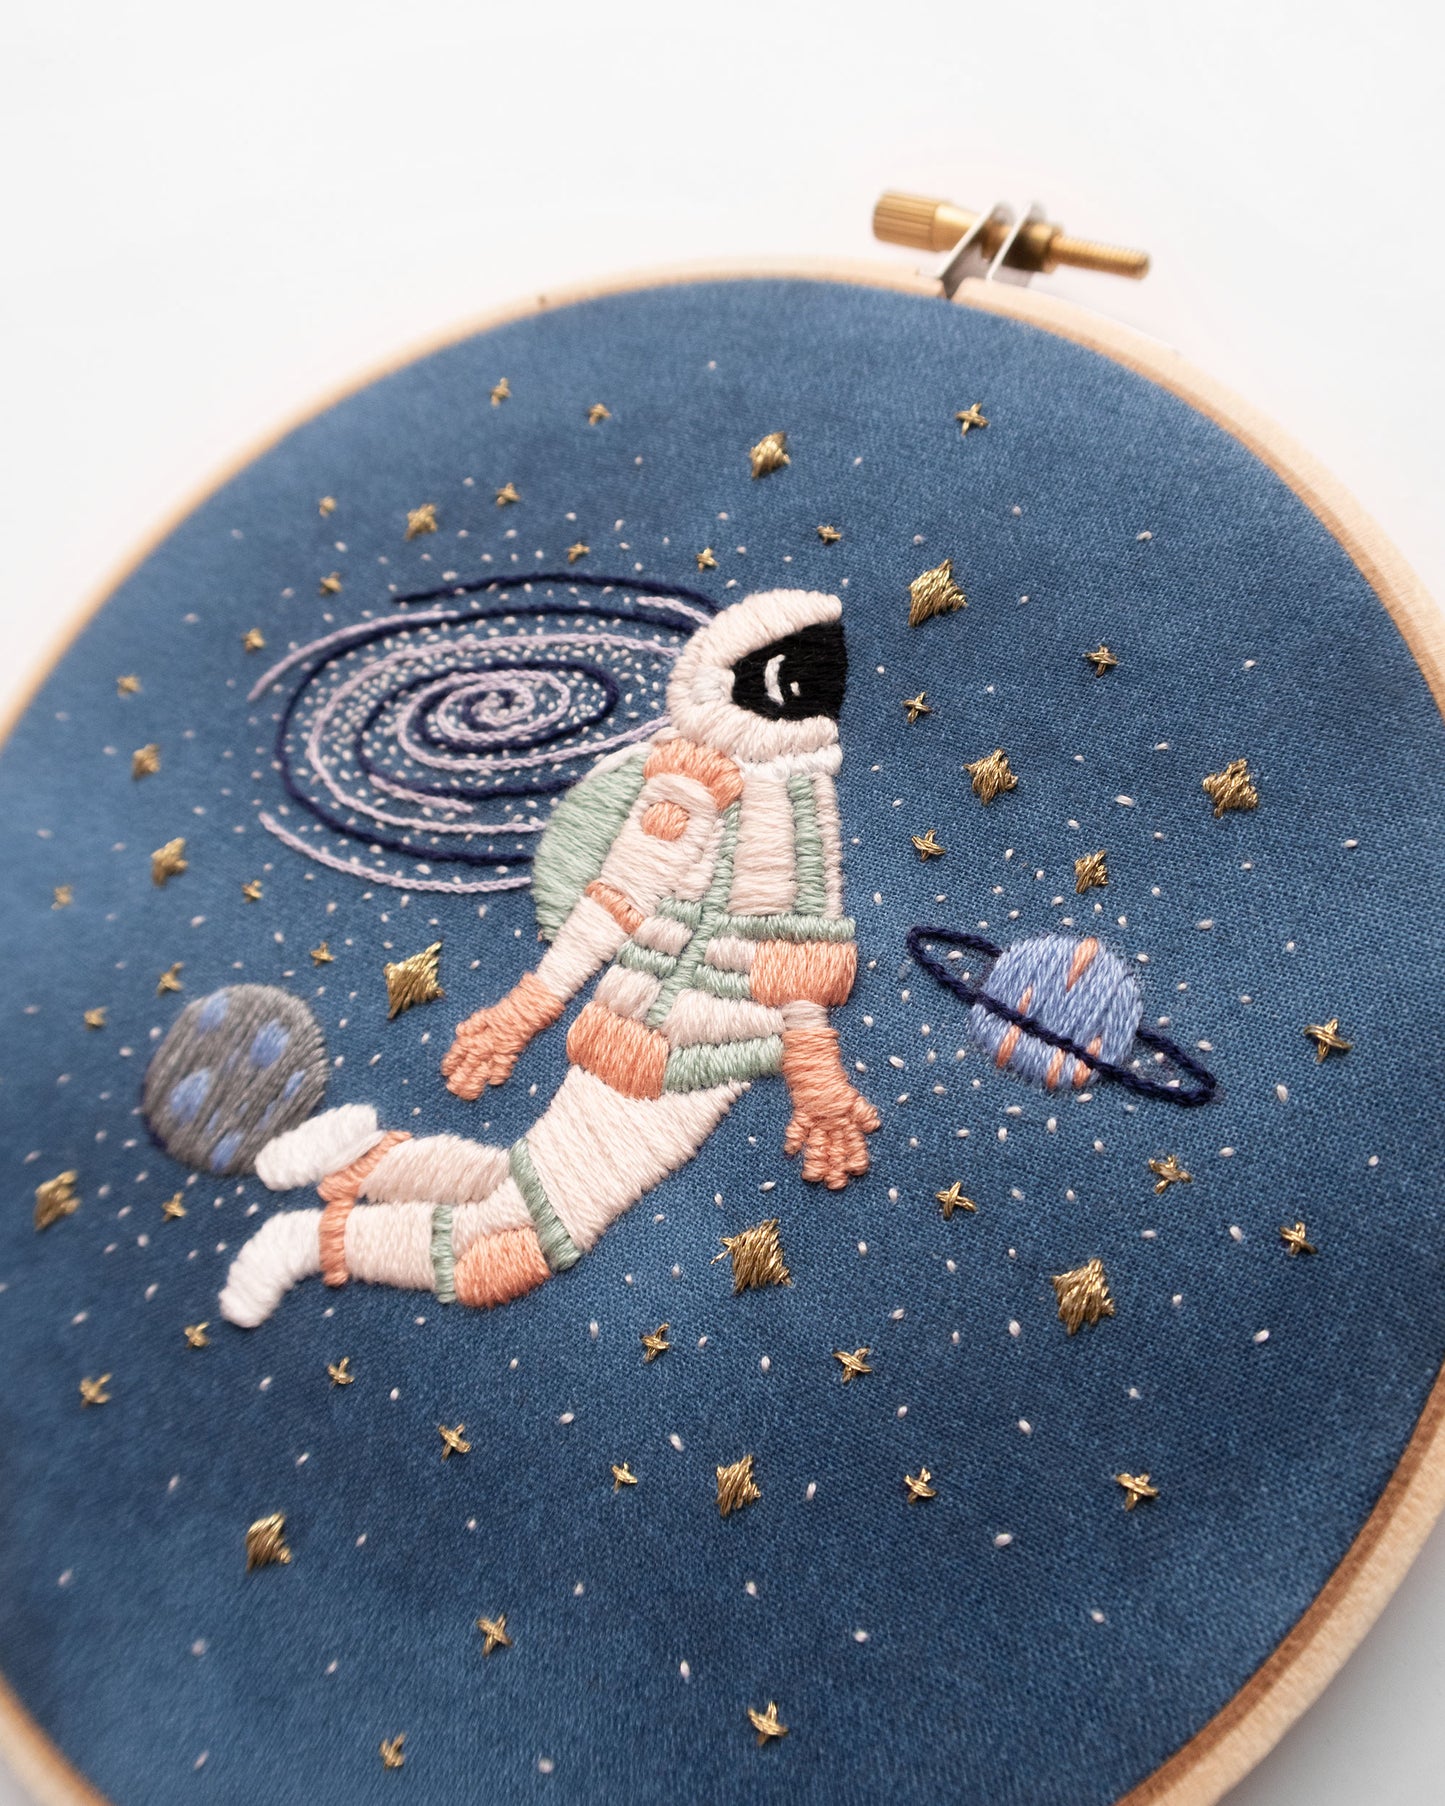 The Curious Astronaut Embroidery Pattern close up details